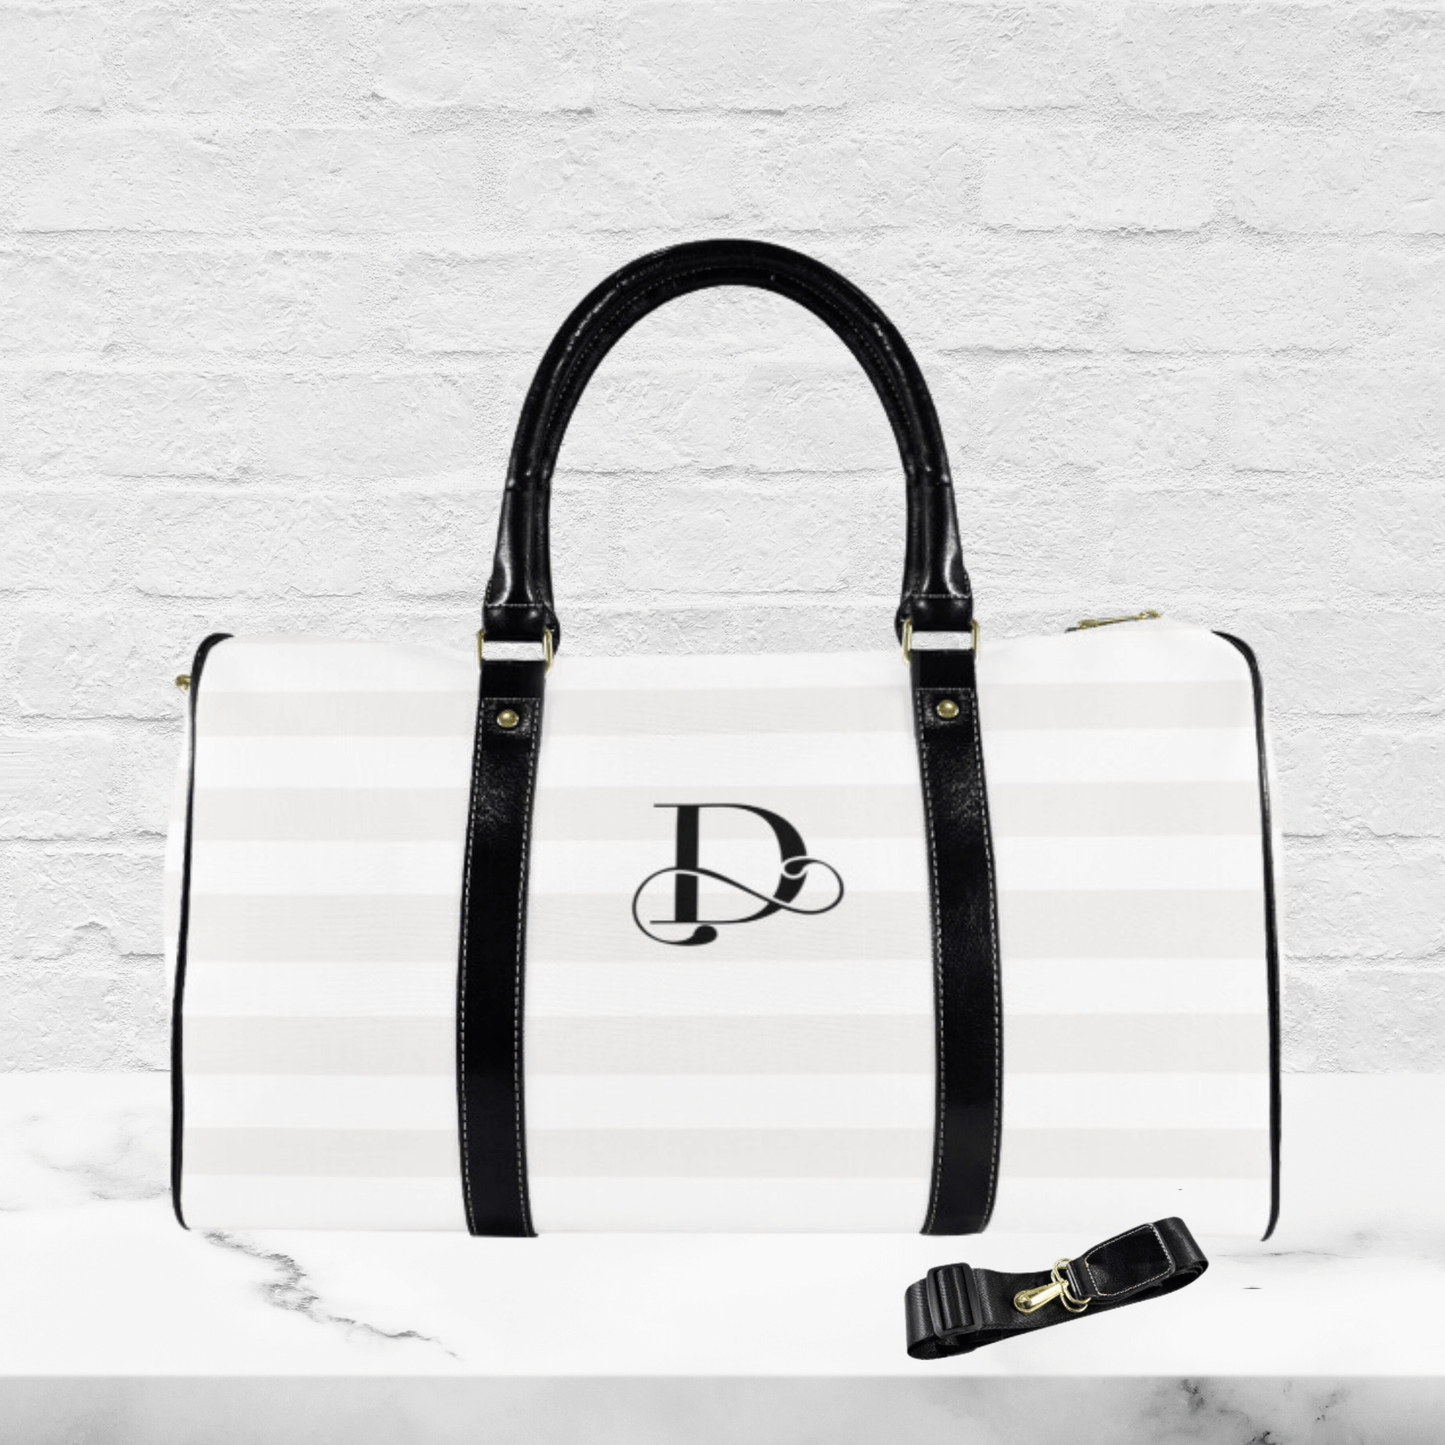 OUr elegant duffel bag for women is this classy stripped and monogrammed flight bag with black handles.